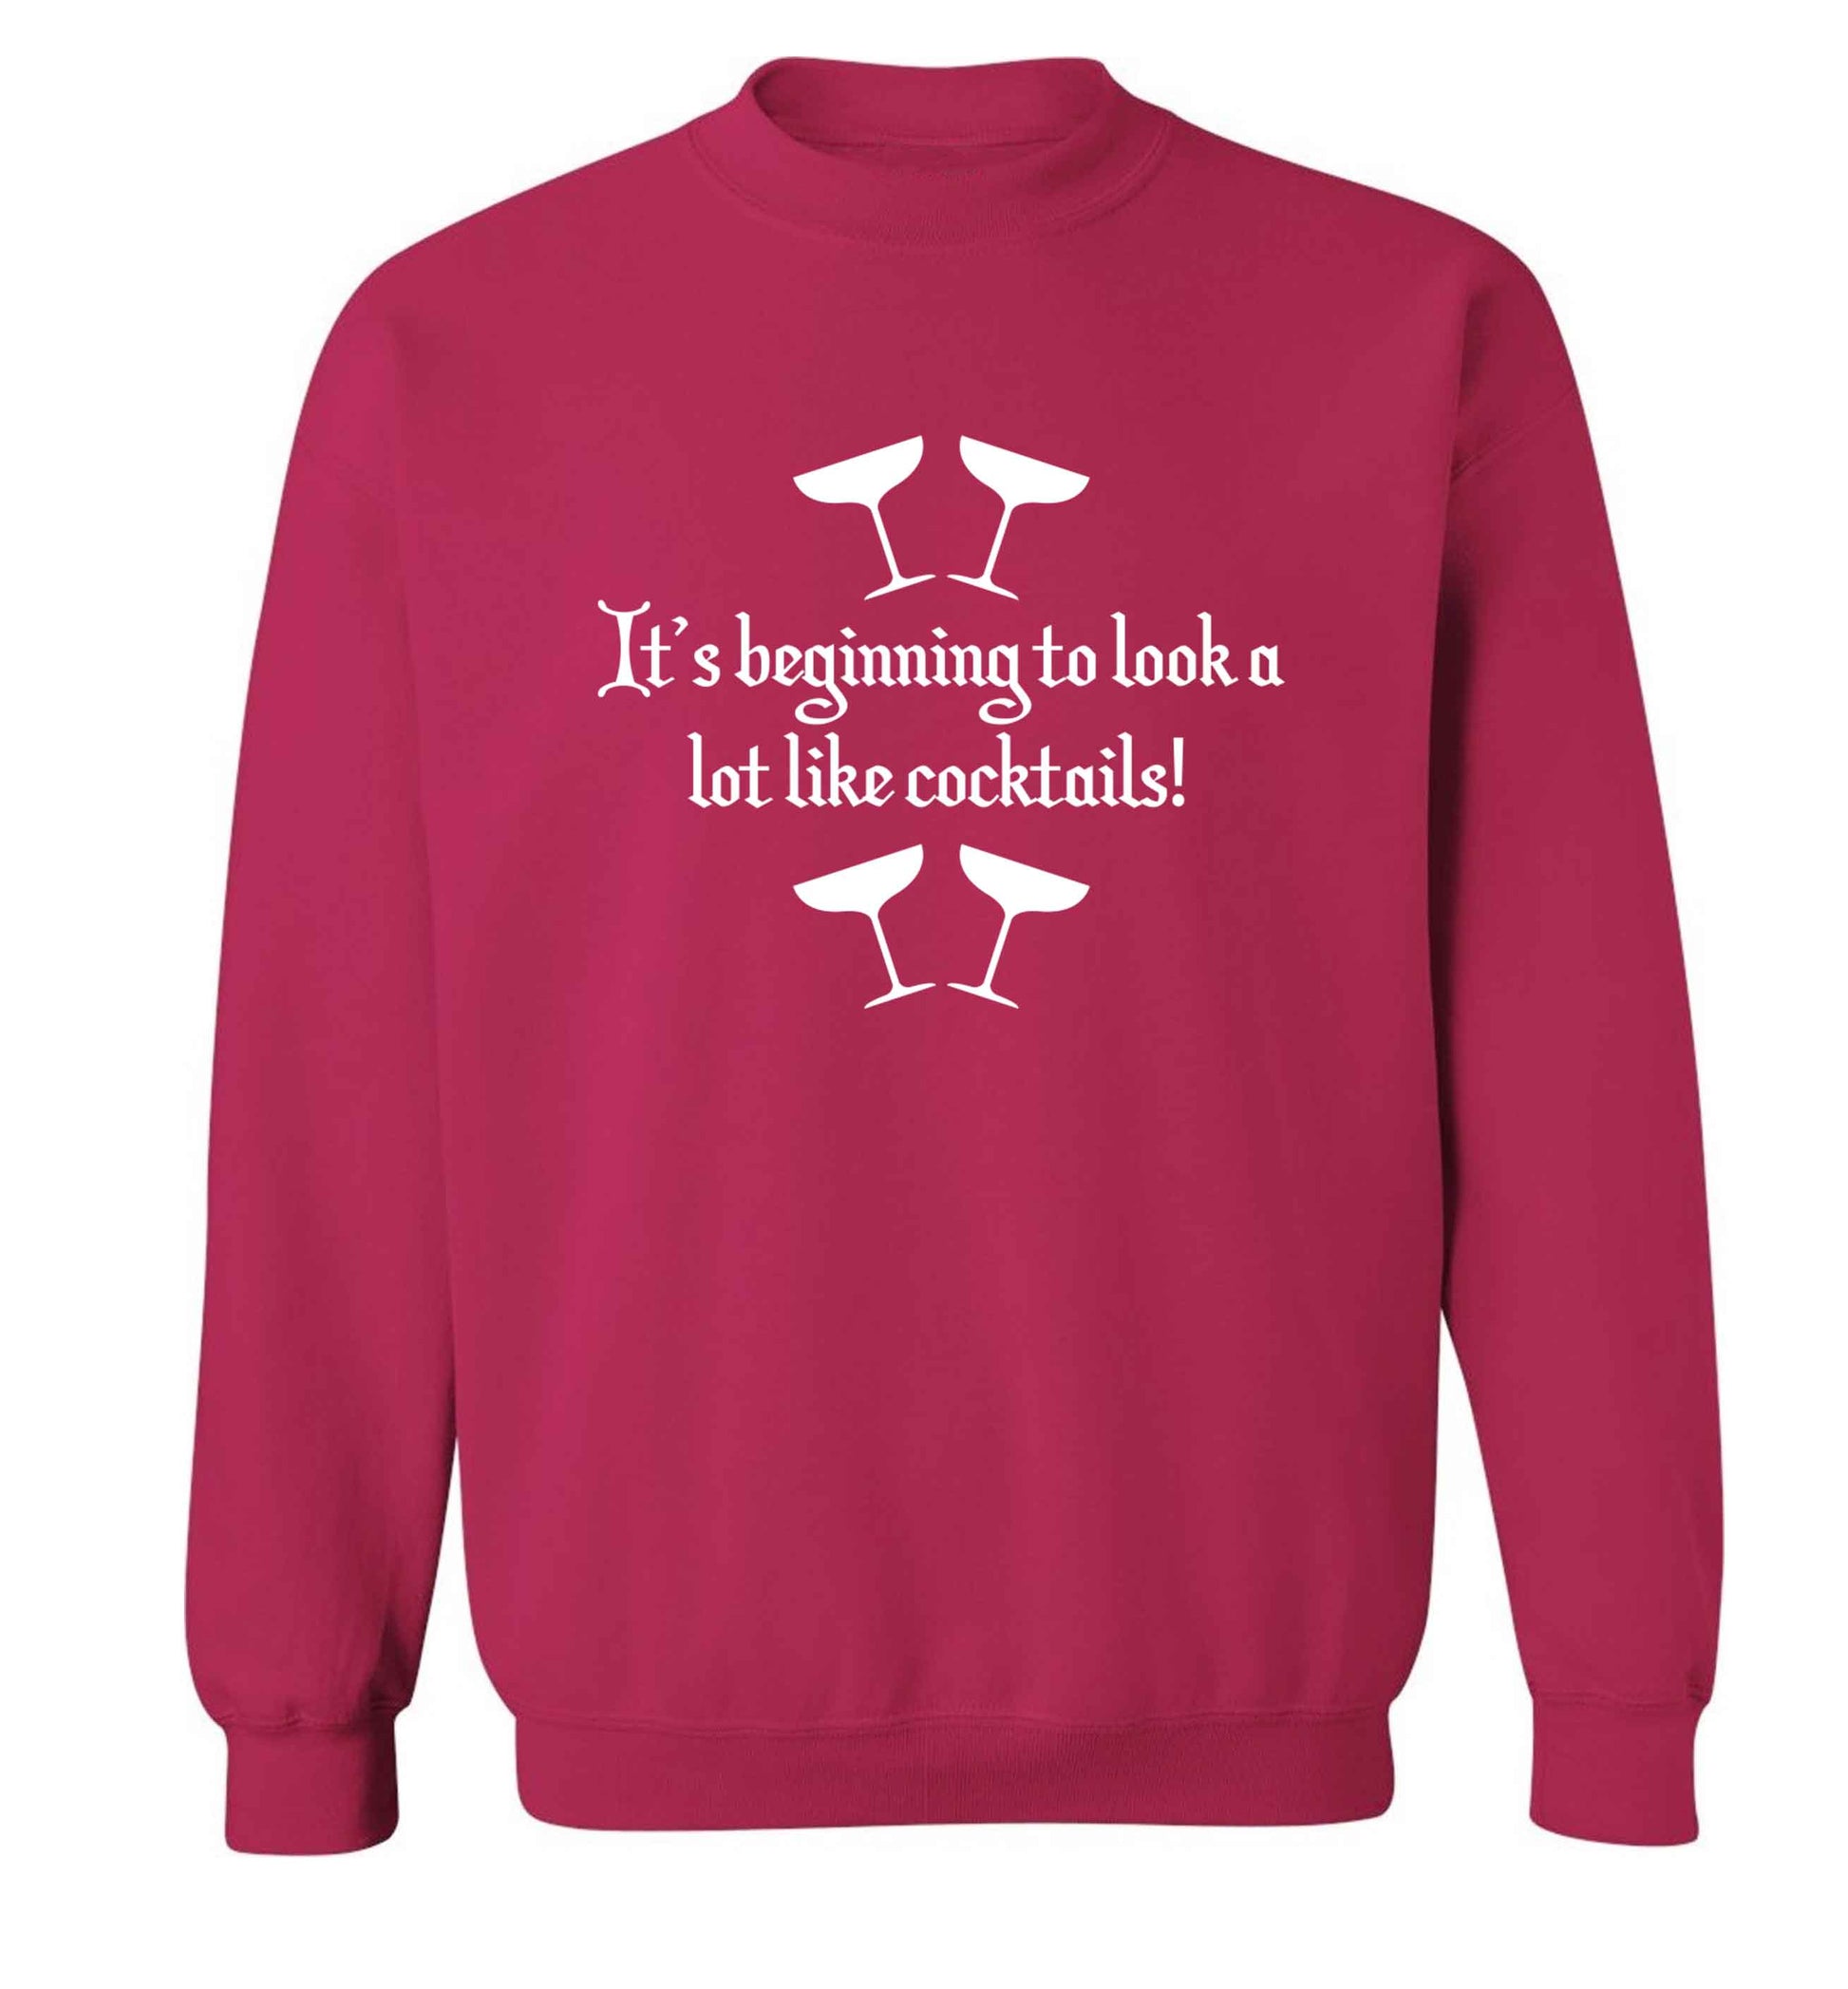 It's beginning to look a lot like cocktails Adult's unisex pink Sweater 2XL